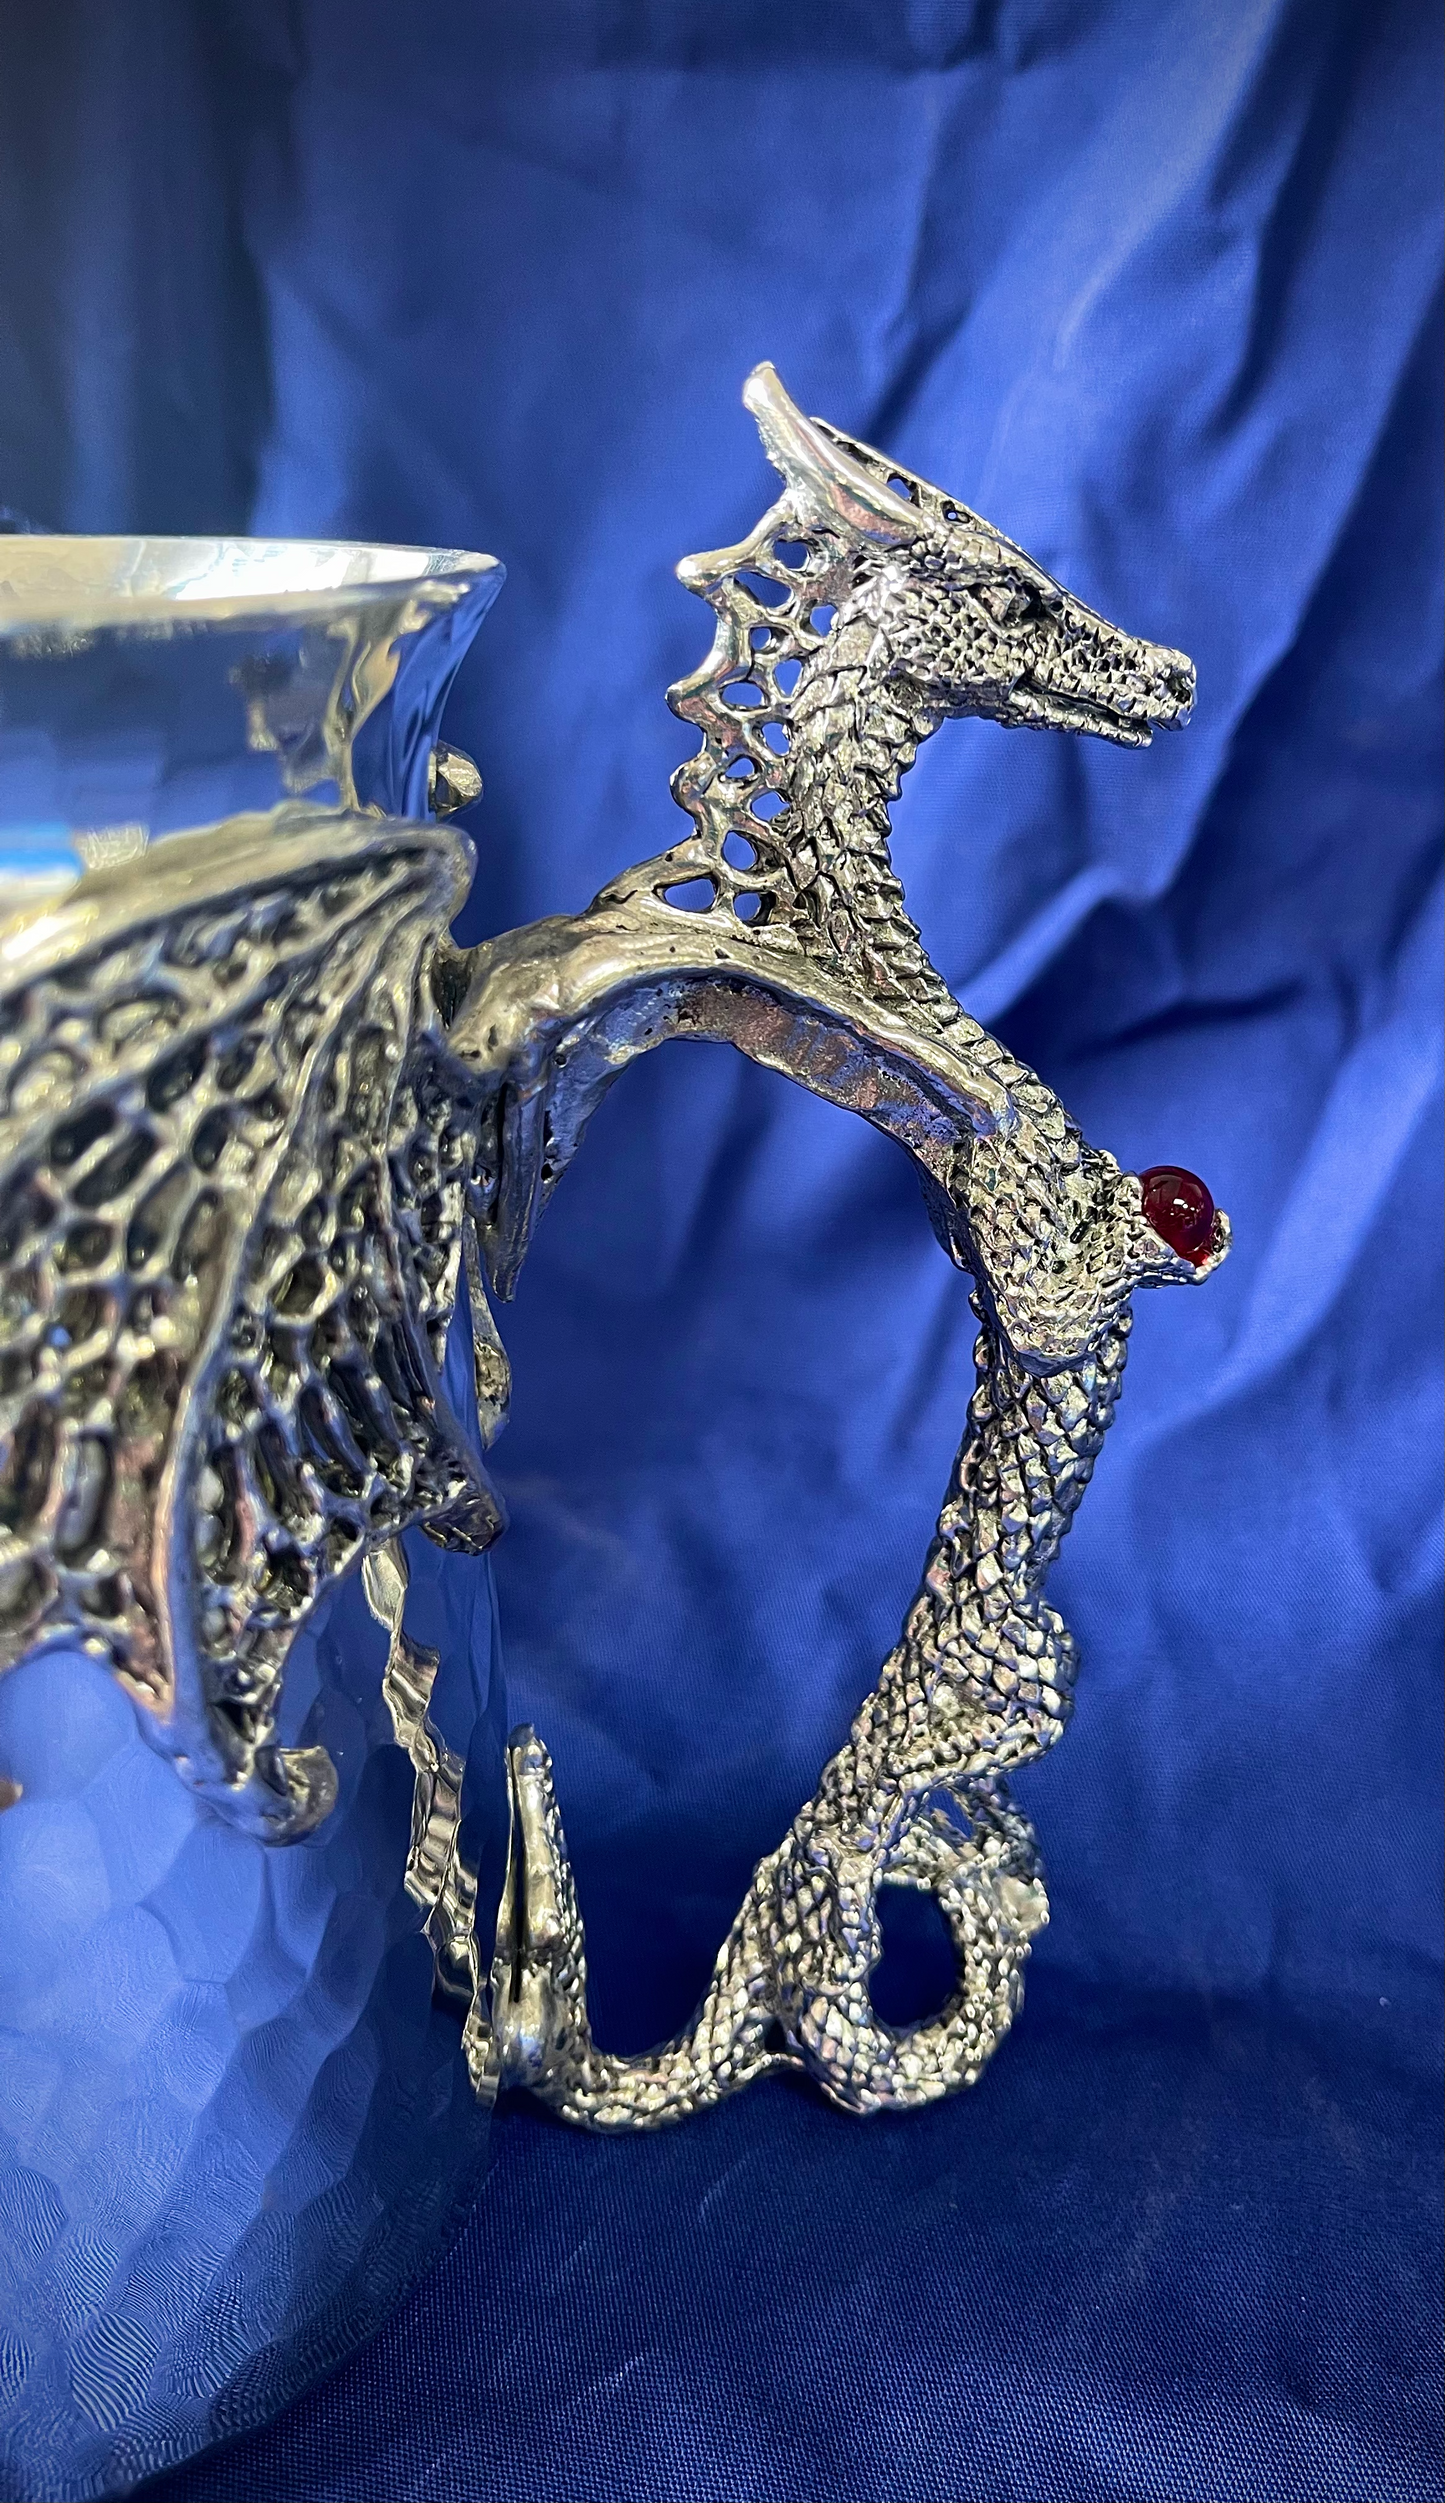 Lace Wing Dragon Stein